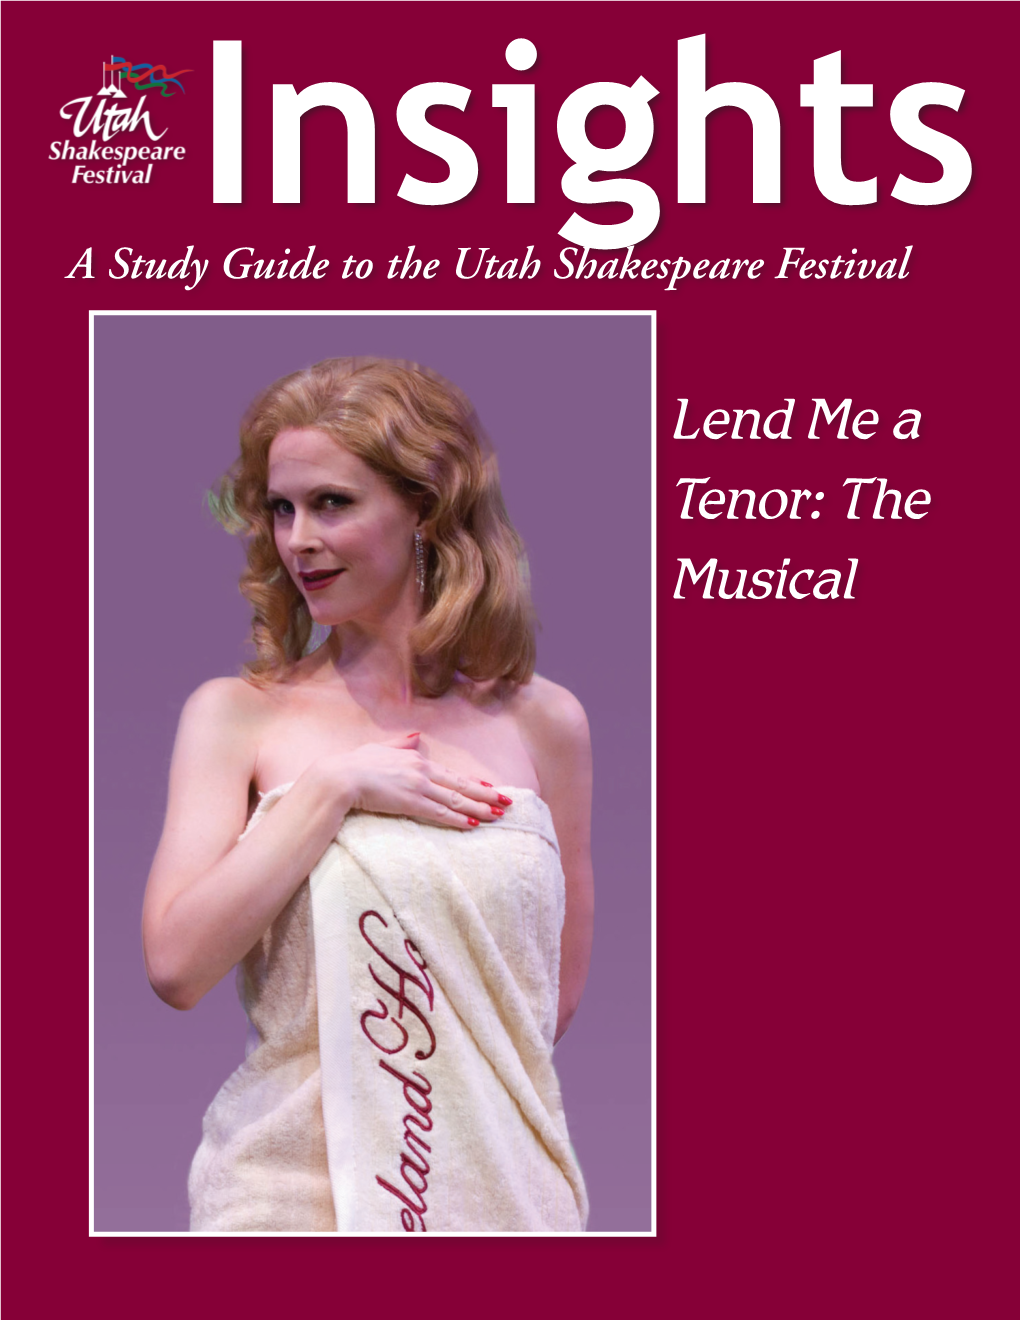 Lend Me a Tenor: the Musical the Articles in This Study Guide Are Not Meant to Mirror Or Interpret Any Productions at the Utah Shakespeare Festival